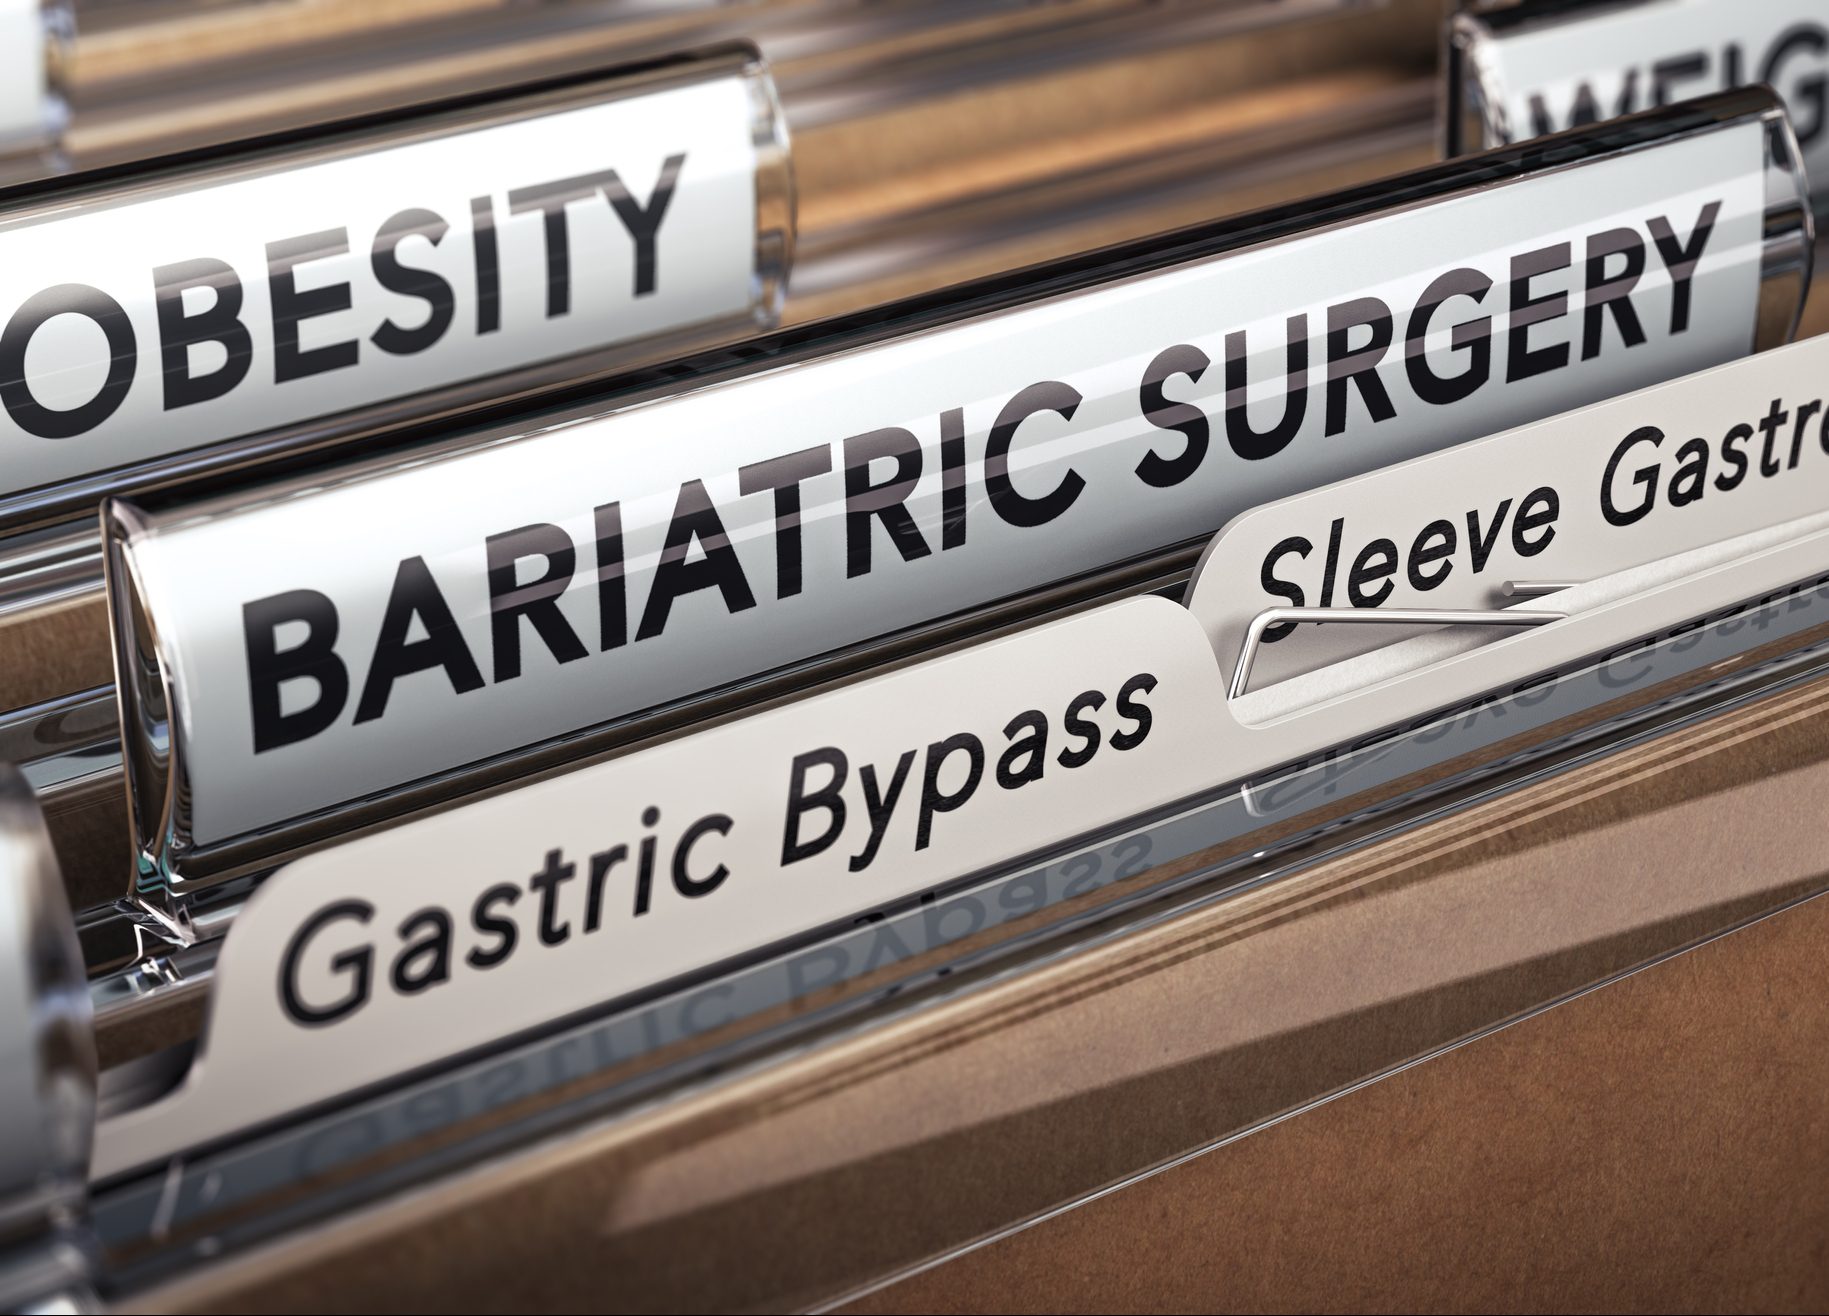 FUNIBER-bariatric-surgery-types-gastric-bypass-or-sleeve-gastrectomy-